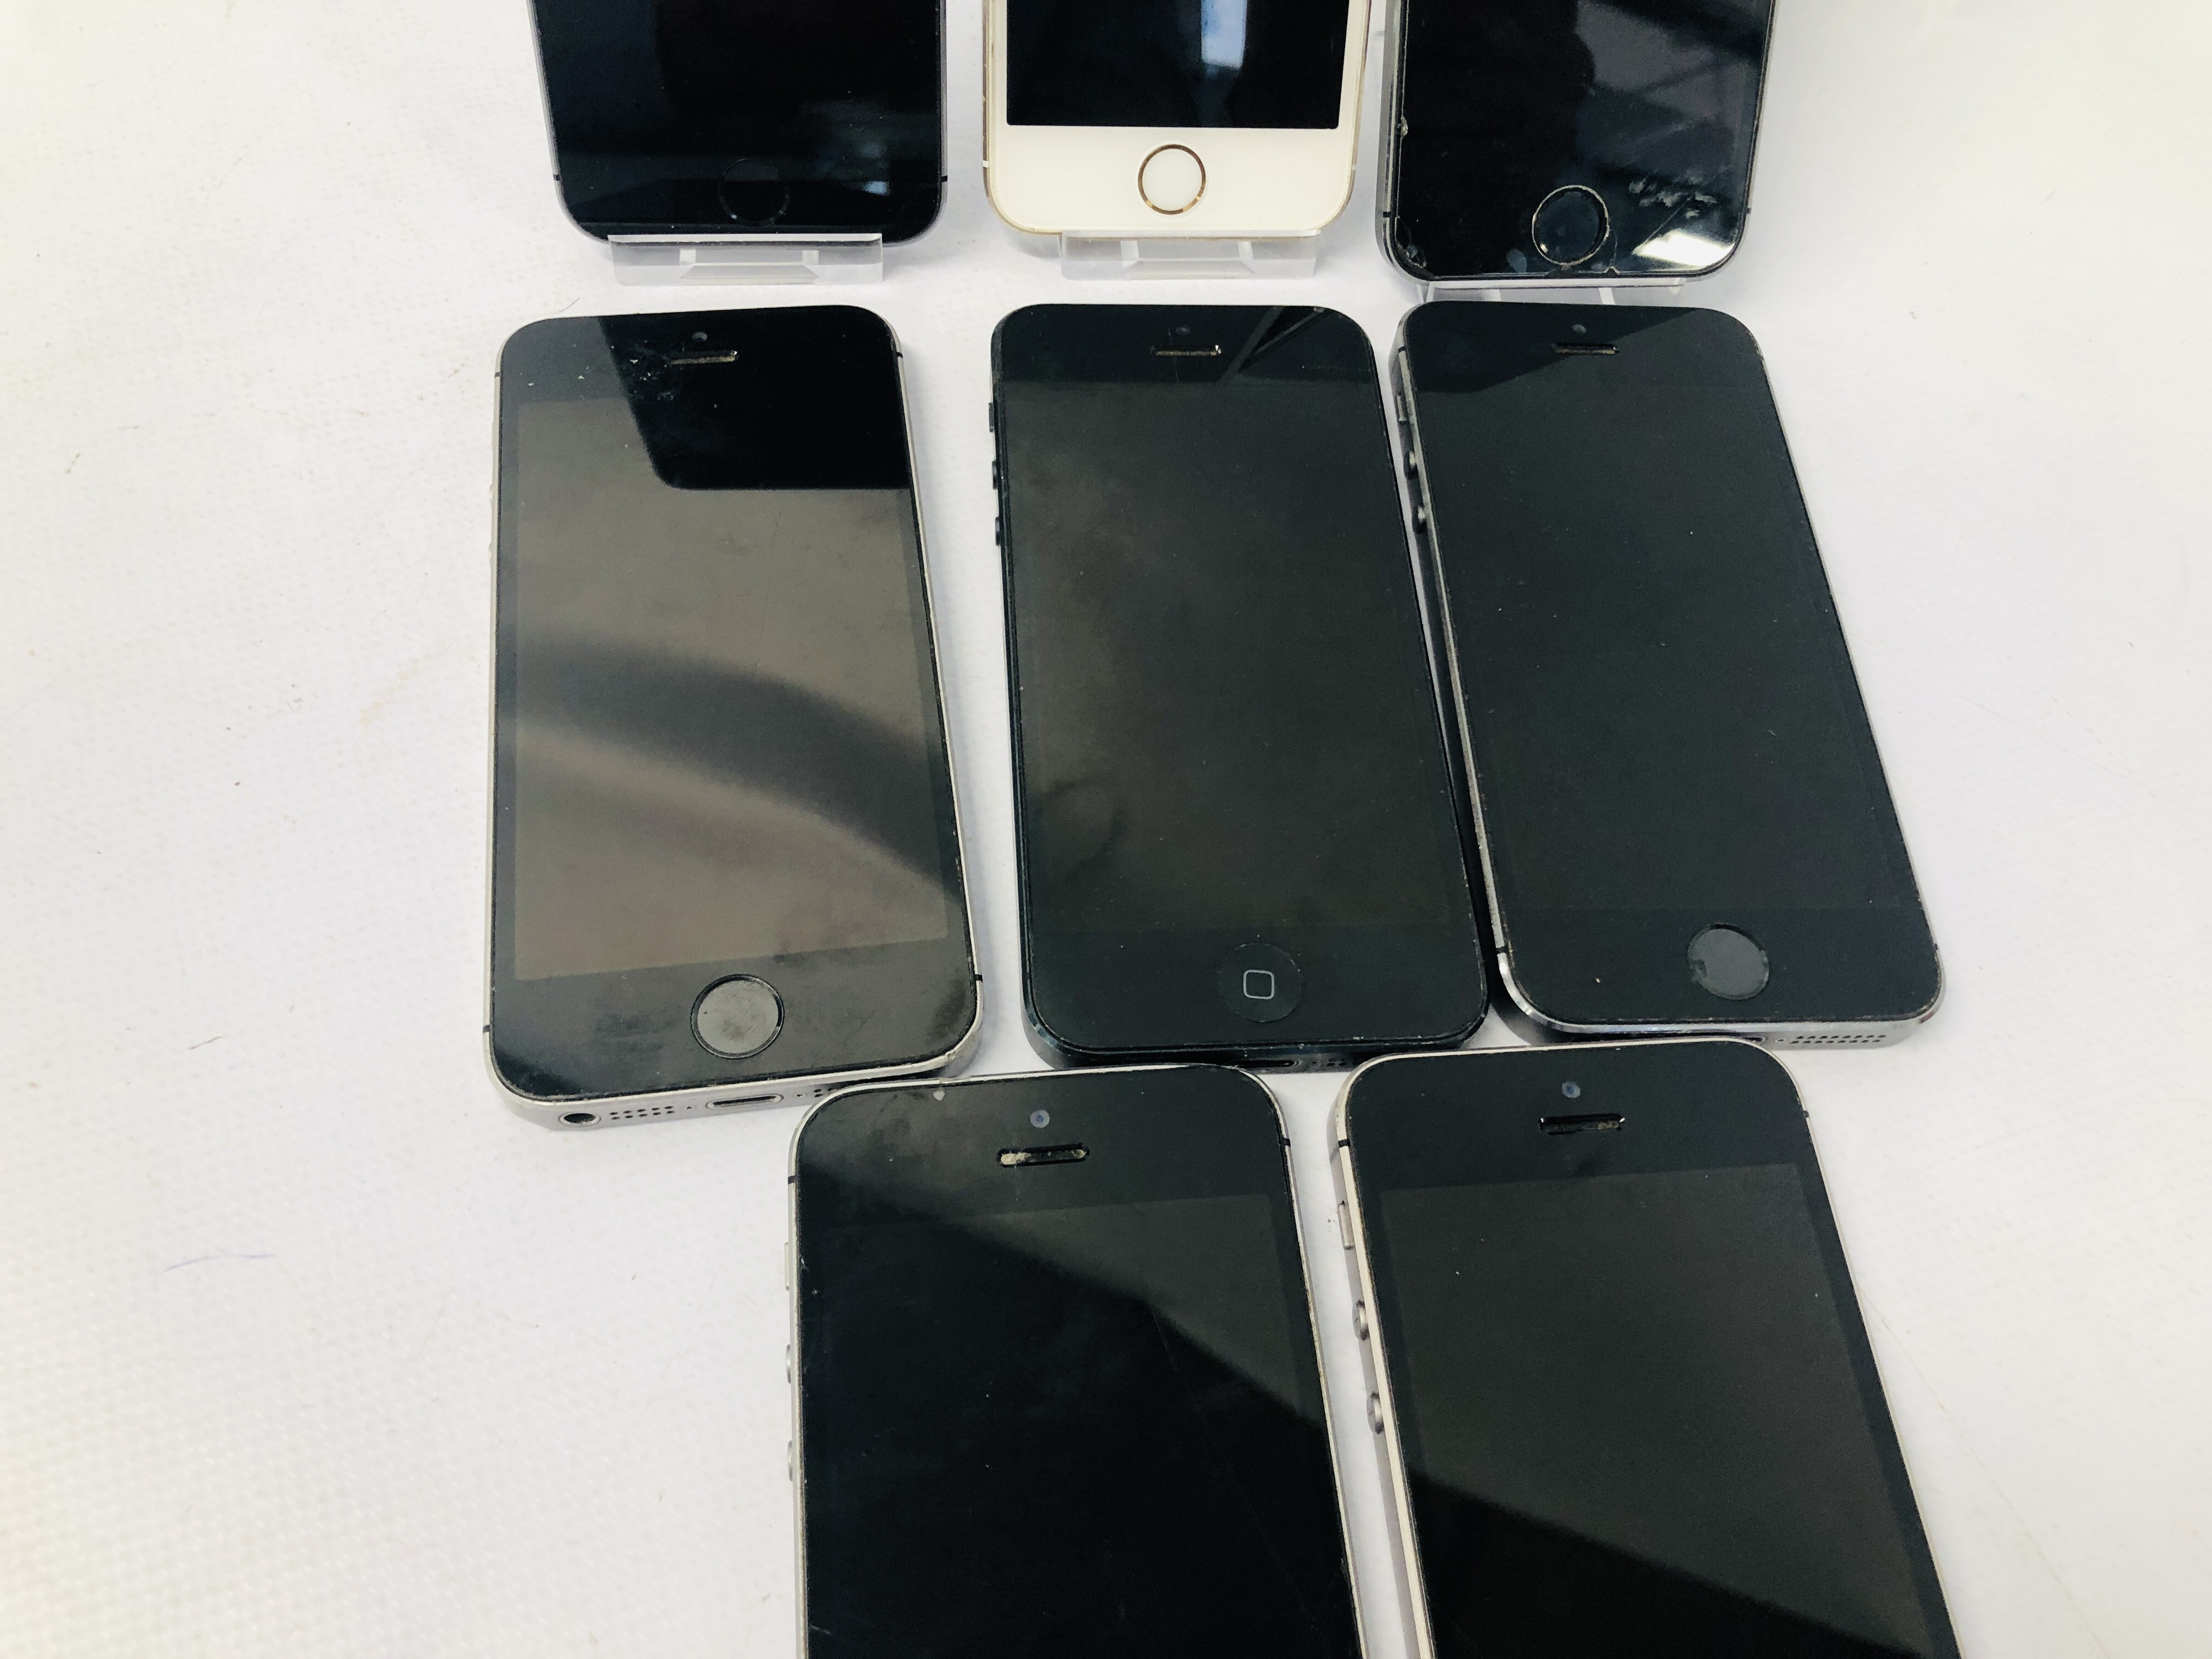 8 X APPLE IPHONE (5 X 5S, 3 X 5SE) TWO A/F CONDITION, ICLOUD LOCKED, - Image 3 of 7